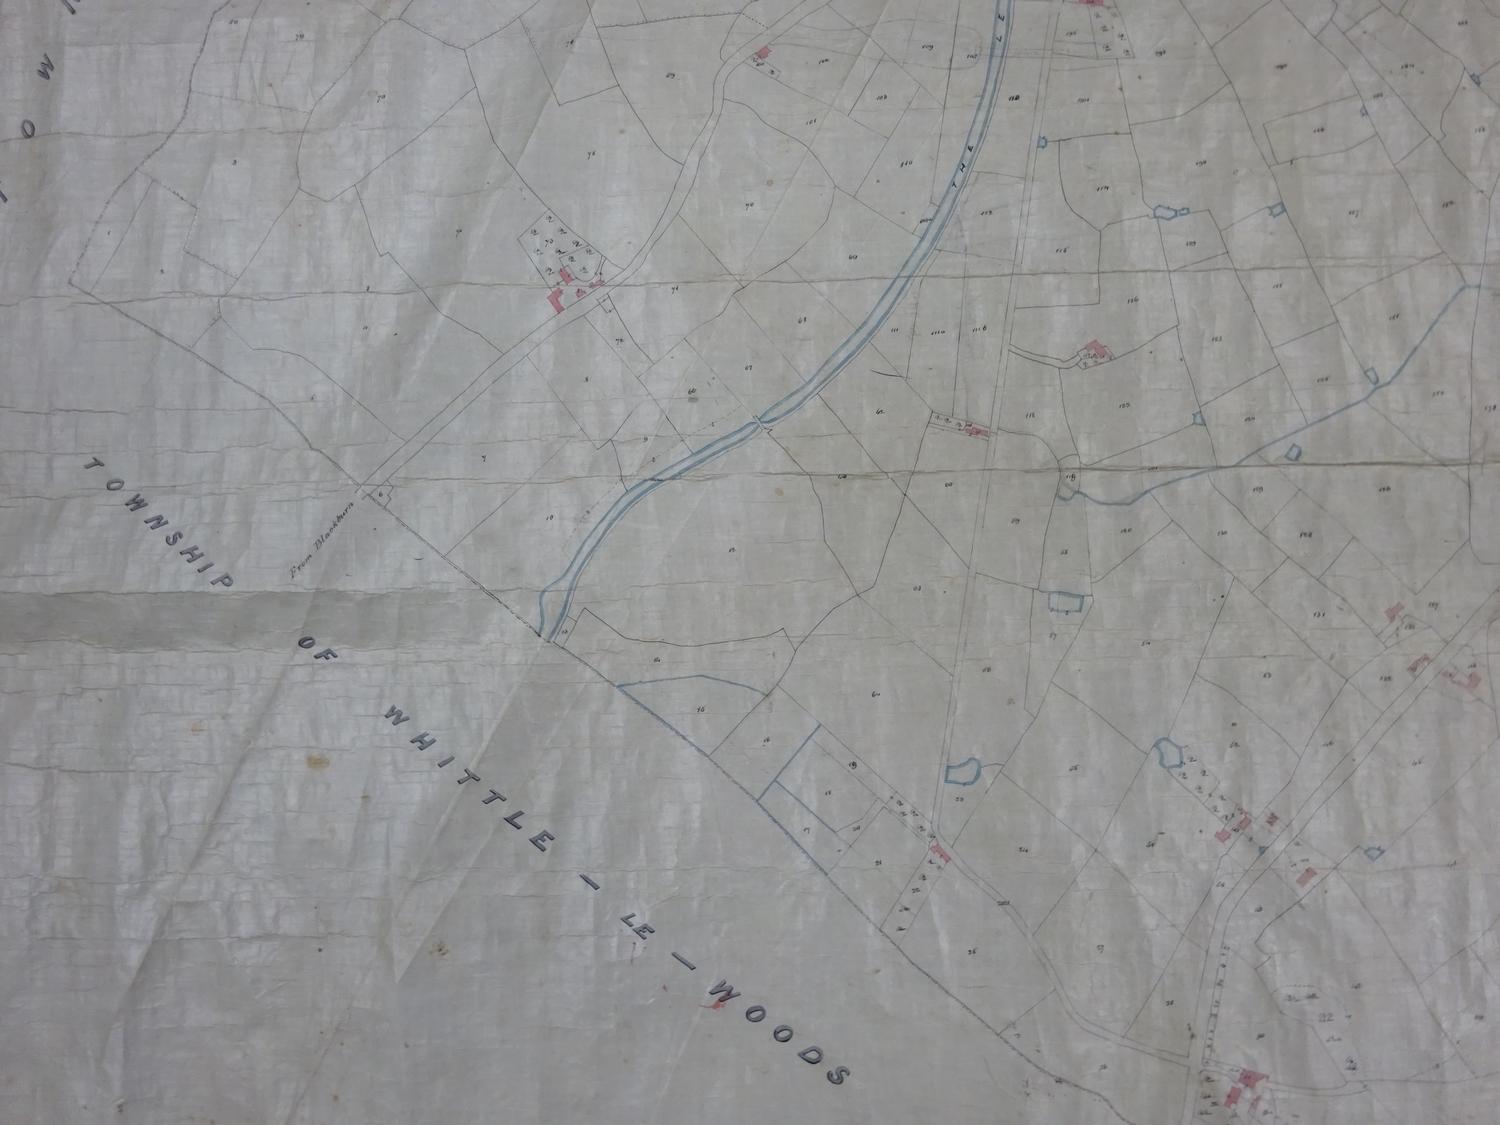 1846 hand drawn Tithe map of Chorley, Lancashire and surrounds (see description) - Image 4 of 5